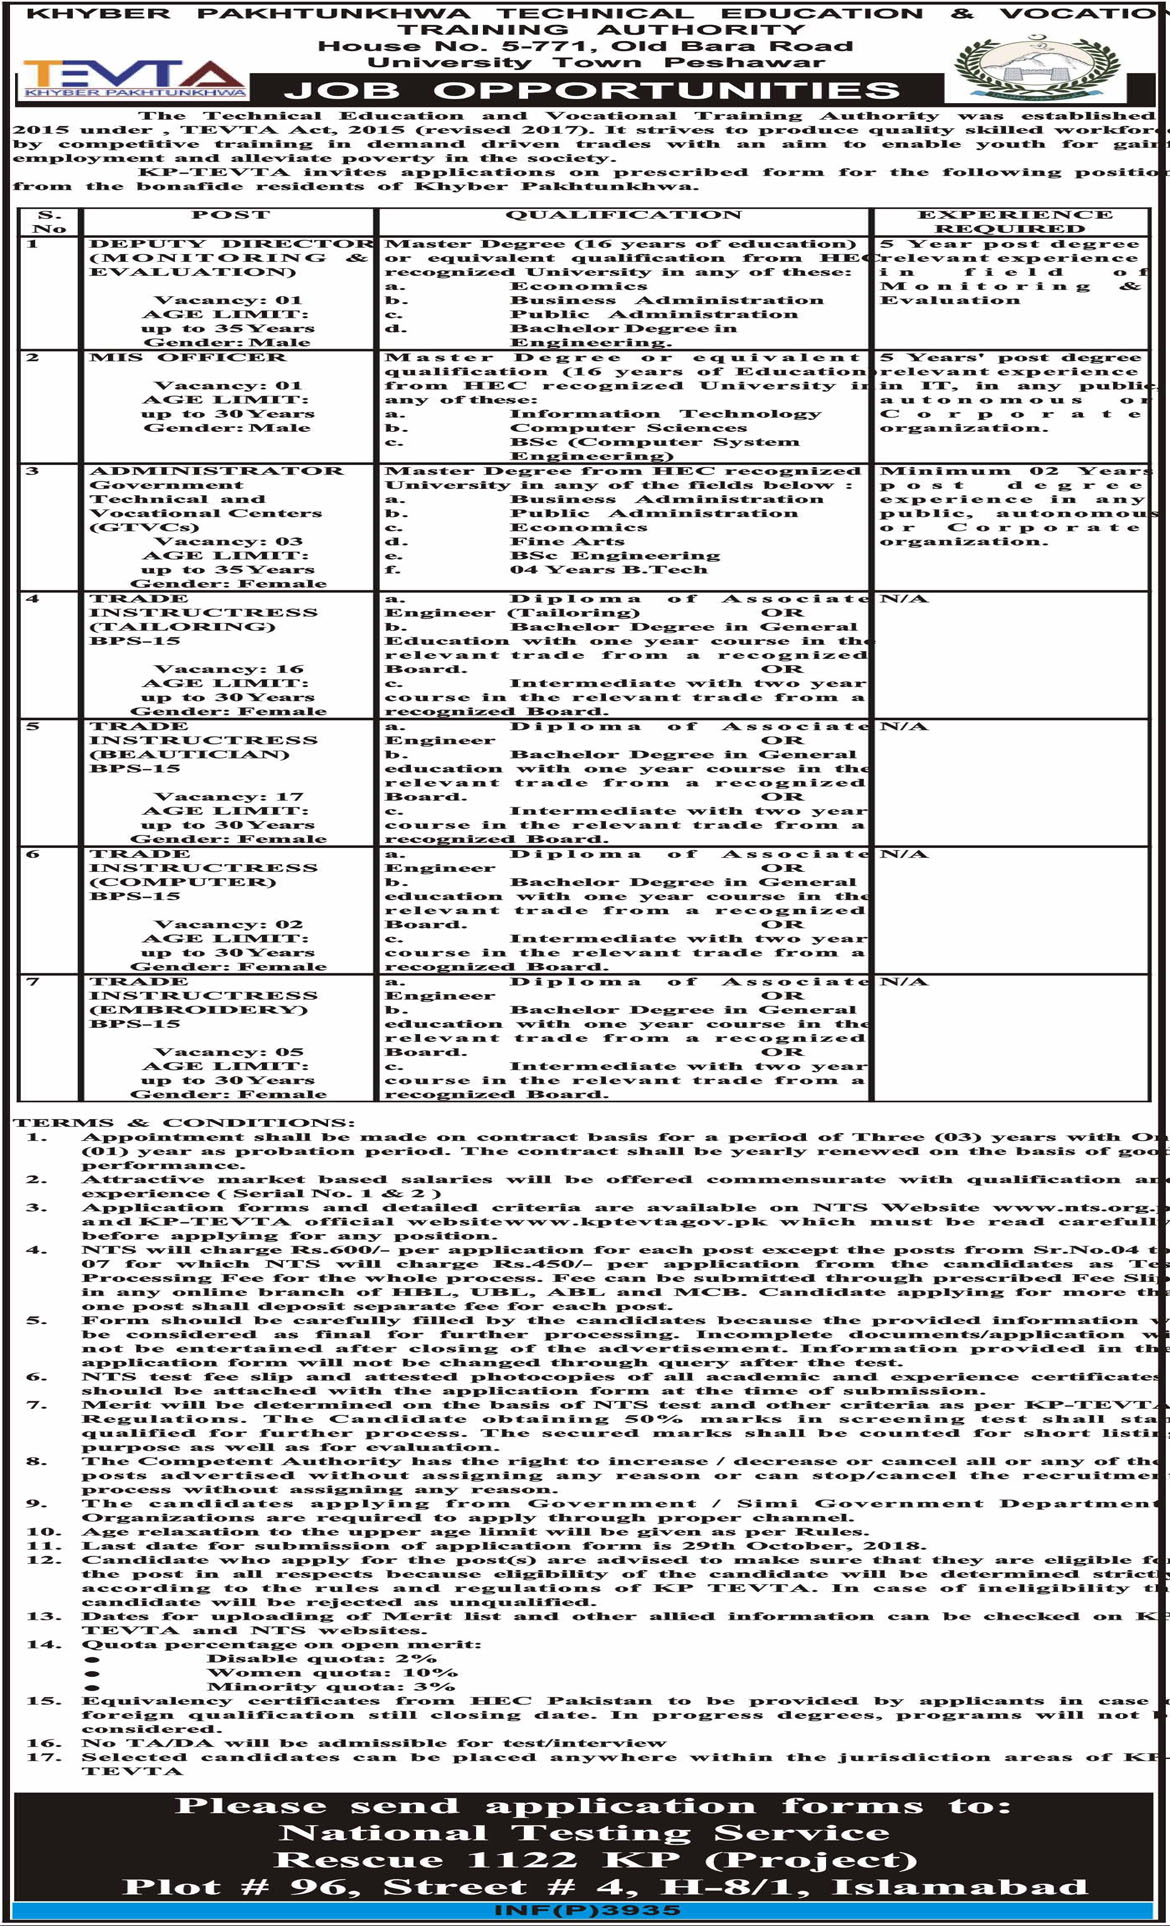 Jobs In Technical Education And Vocational Training Authority TEVTA 13 Oct 2018